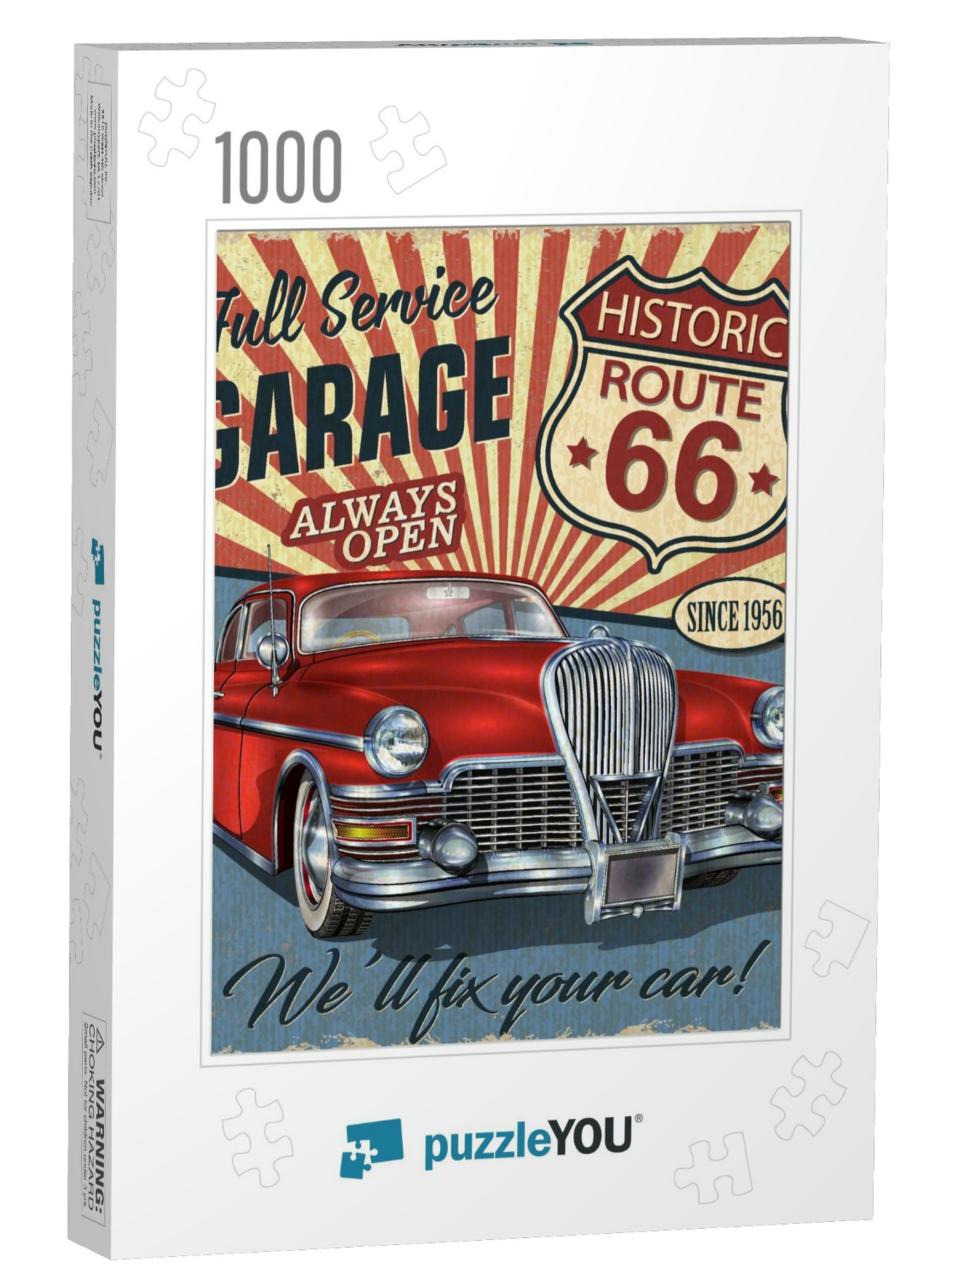 Vintage Route 66 Garage Retro Poster with Retro Car... Jigsaw Puzzle with 1000 pieces